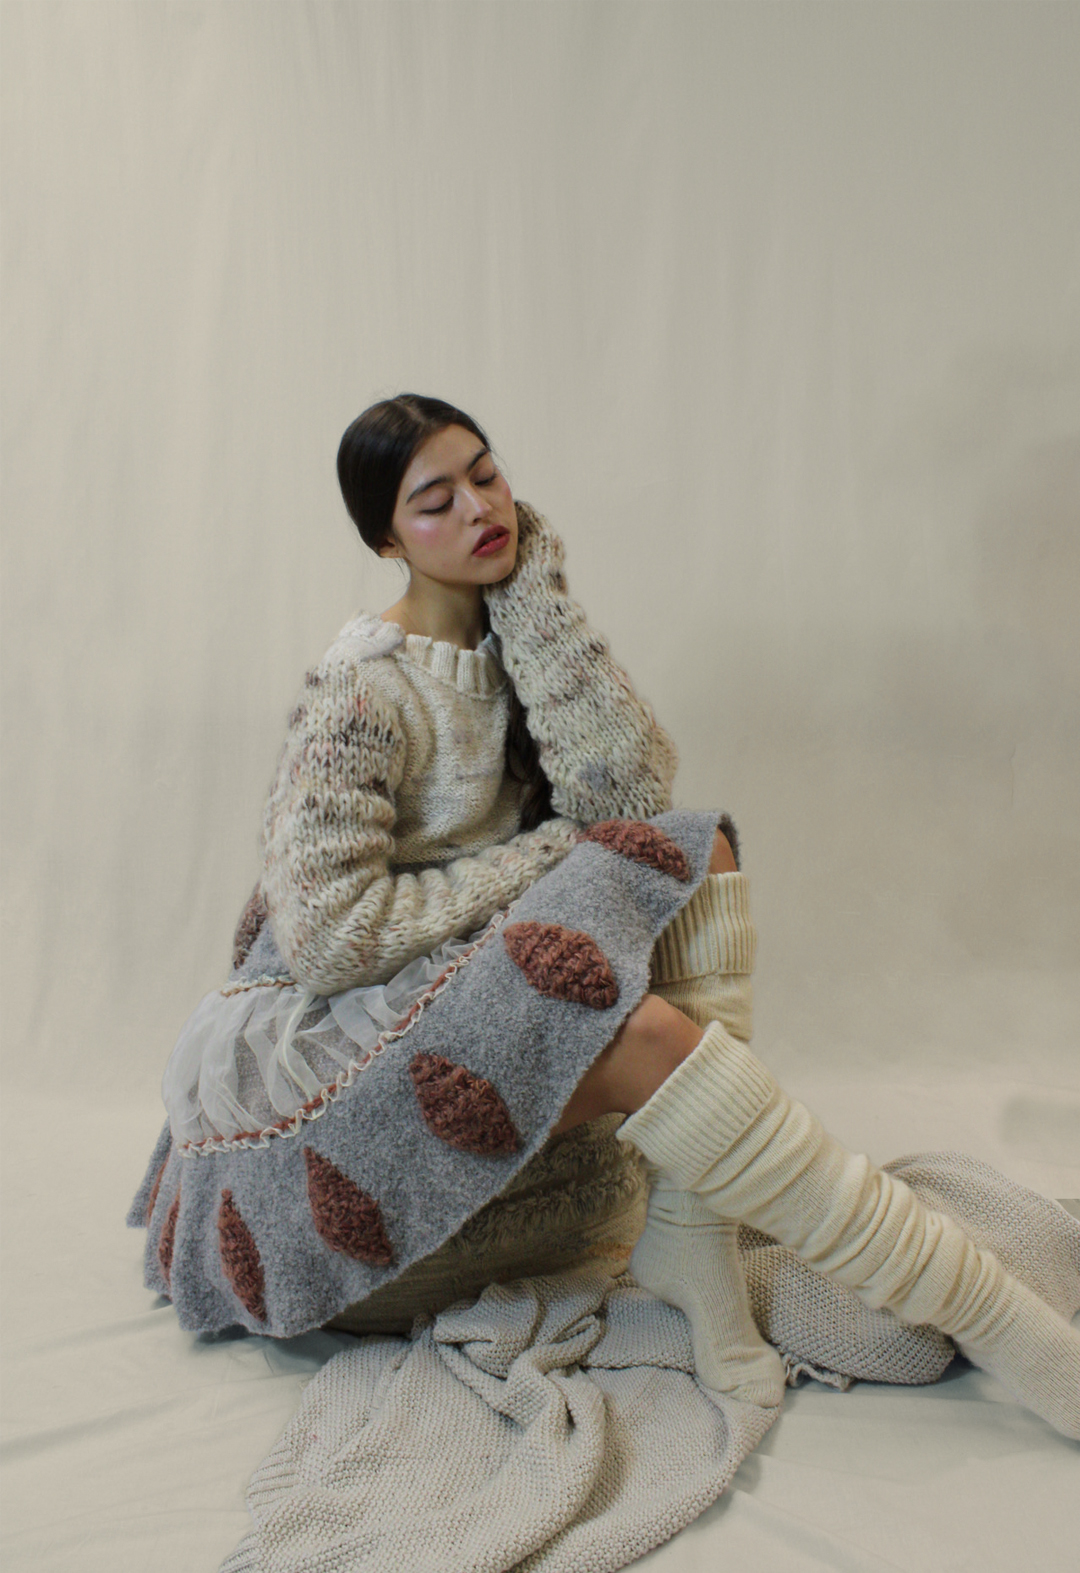 Photo of a girl wearing a multitextural earth-toned babydoll dress with knee high socks. She is sitting on a bean bag and appears to be lost in thought. The background is a warm white.